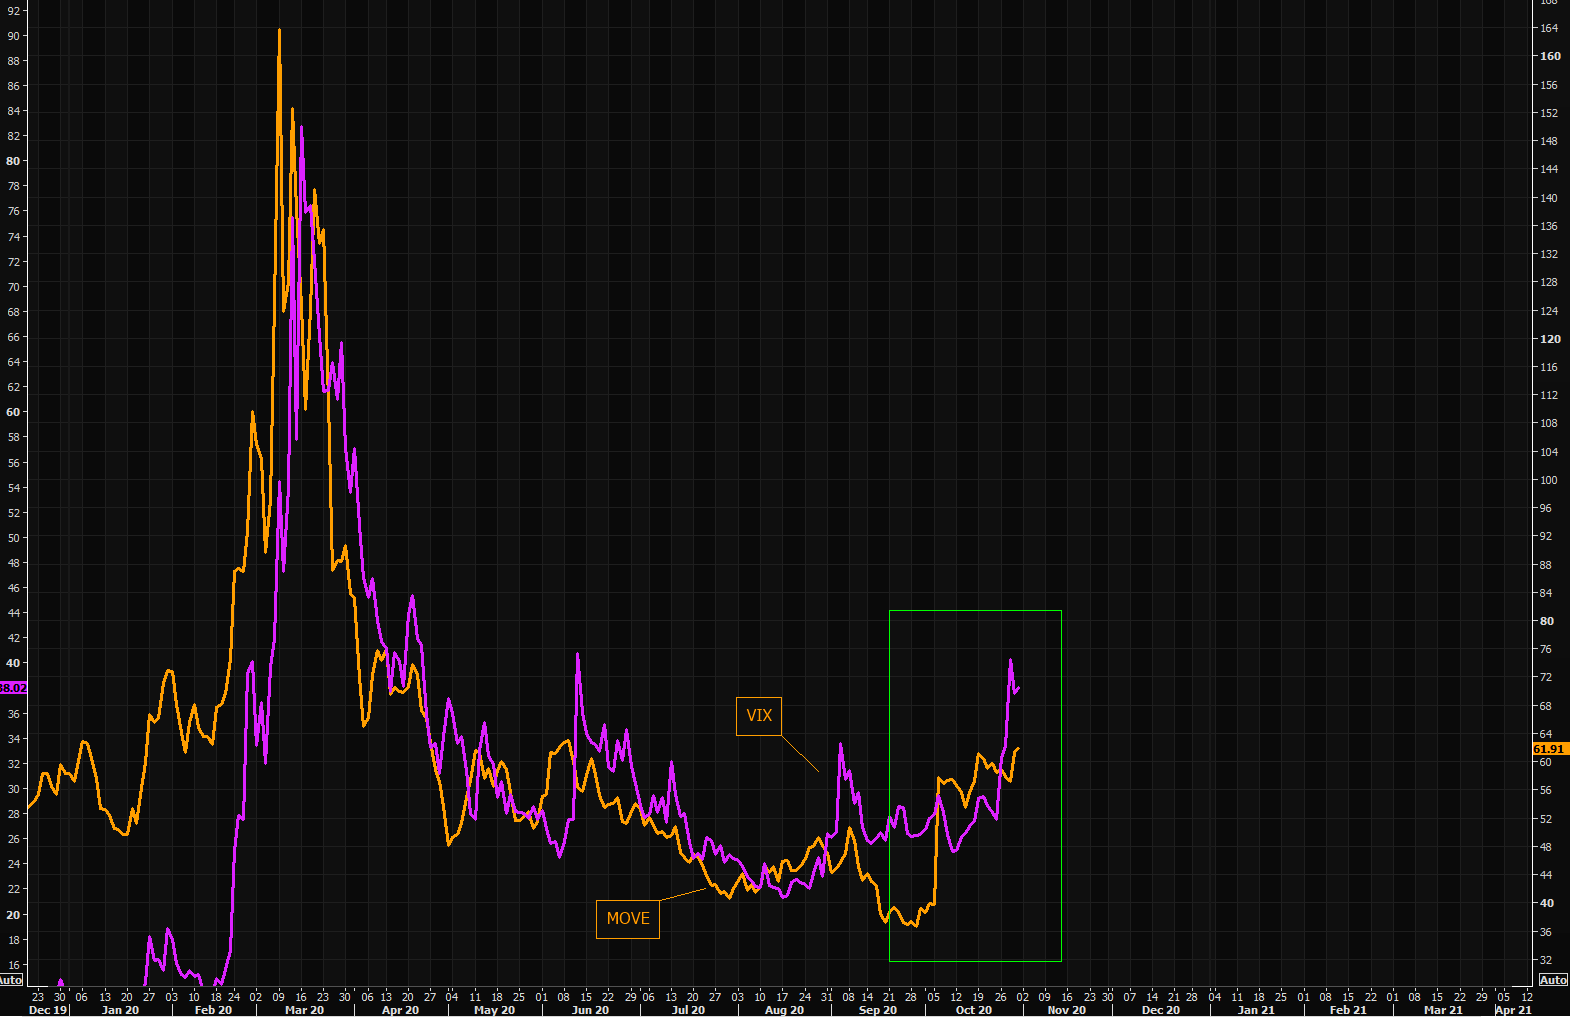 Bond vol eventually "got" VIX moving, but looks like bond vol is not getting excited about the latest VIX move